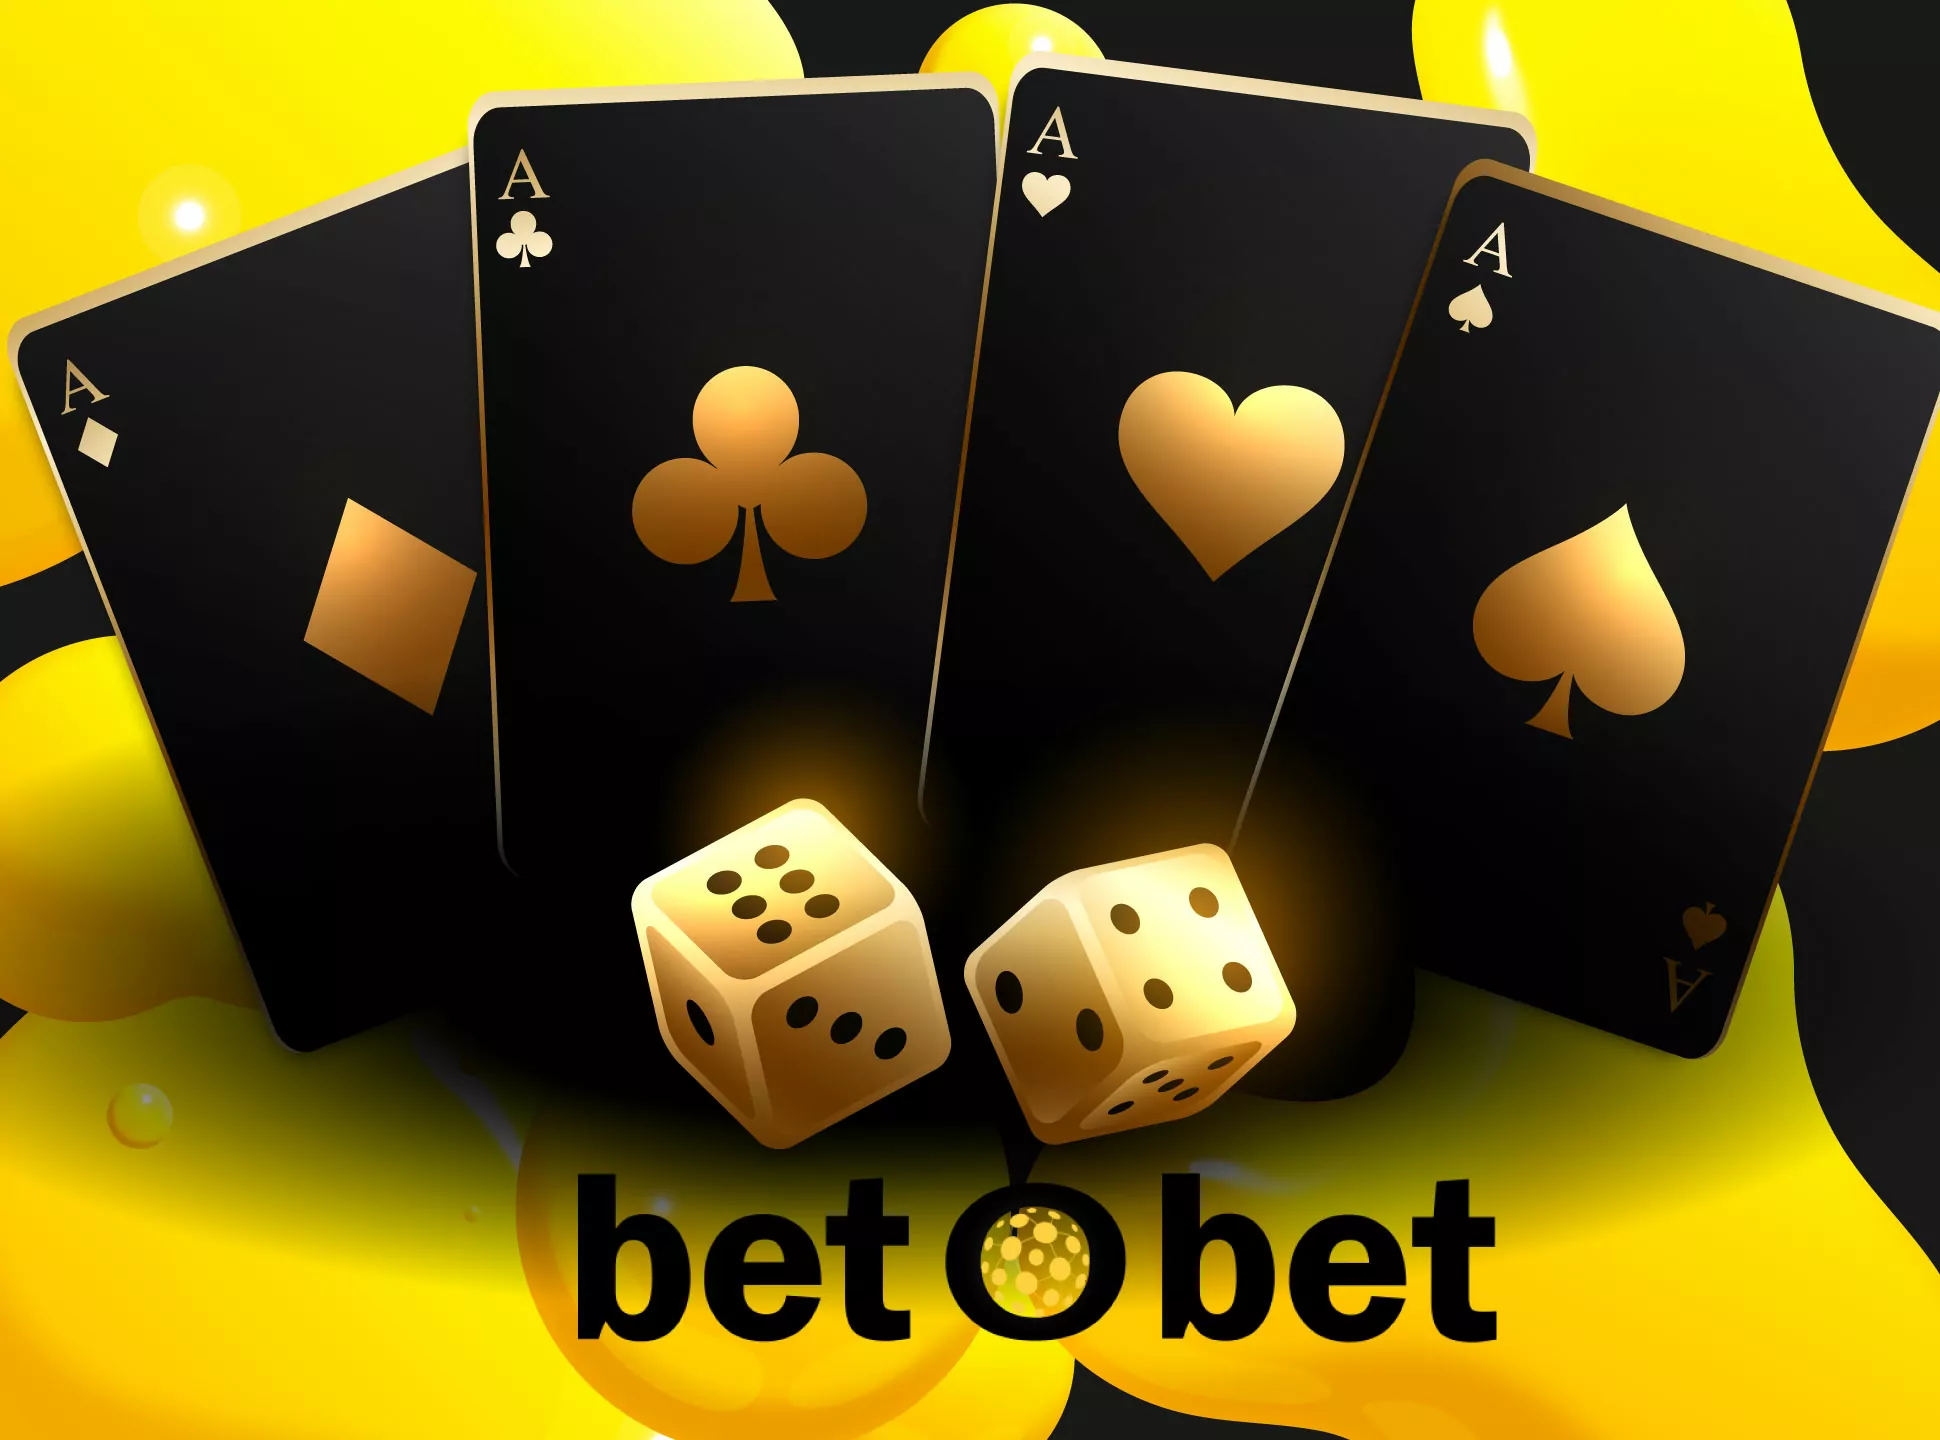 Betobet casino offers various casino entartainment and chances to win money.